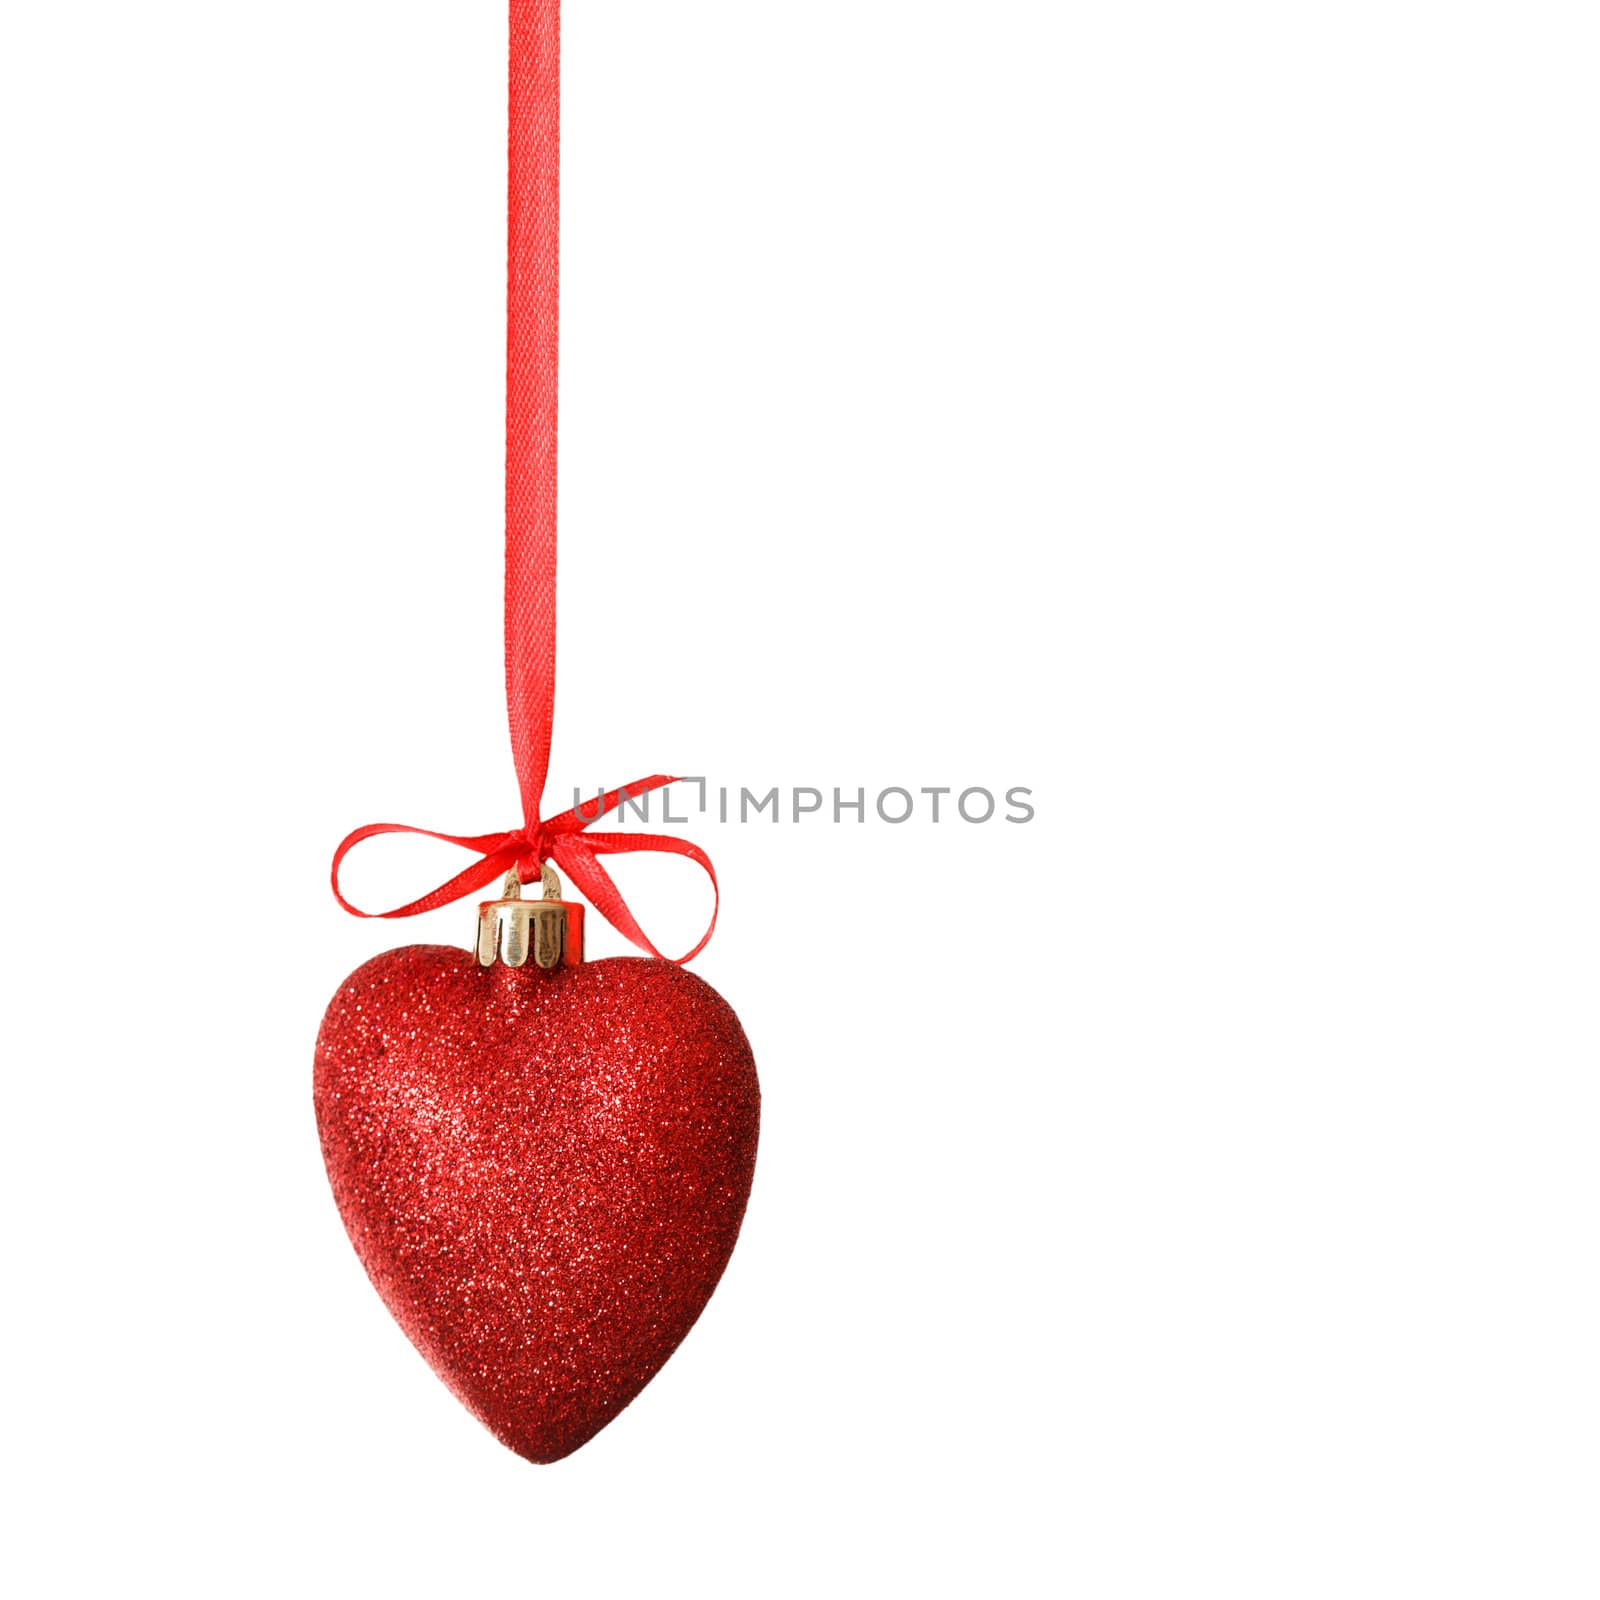  red heart on ribbon